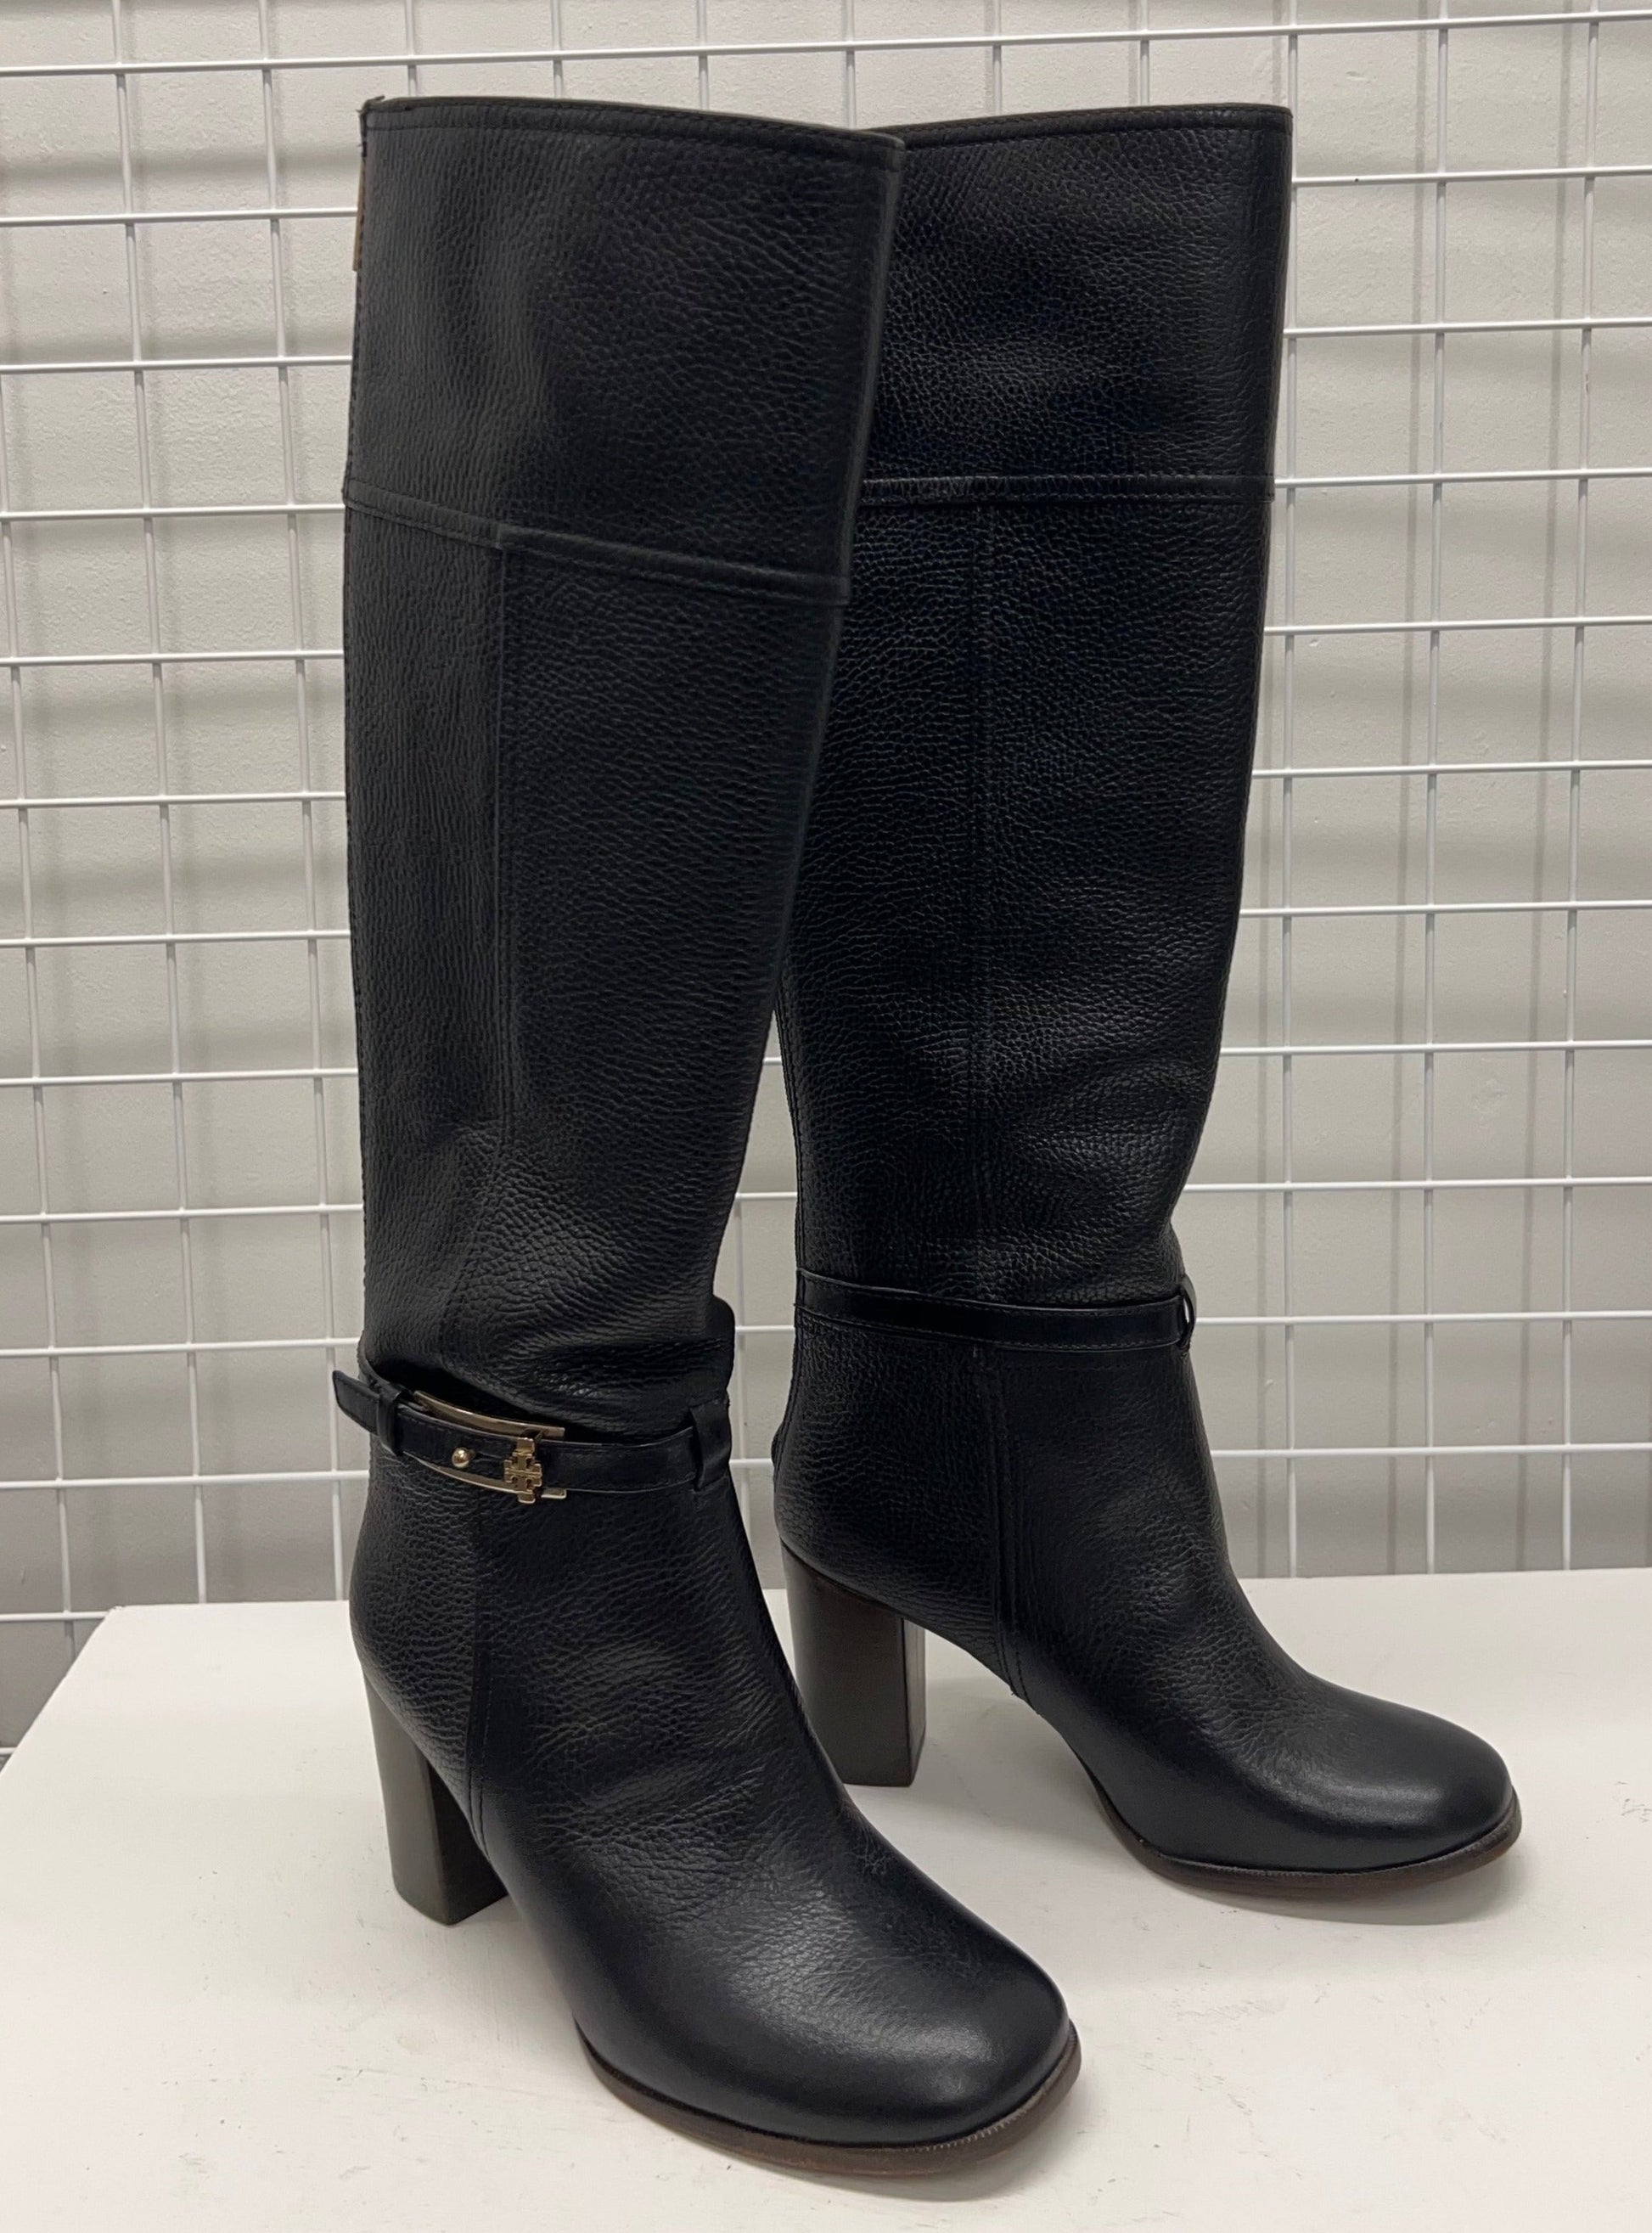 Tory Burch Leather Knee High Black Boots Heel (Very Good) (Size 4 UK / –  Shop for Shelter